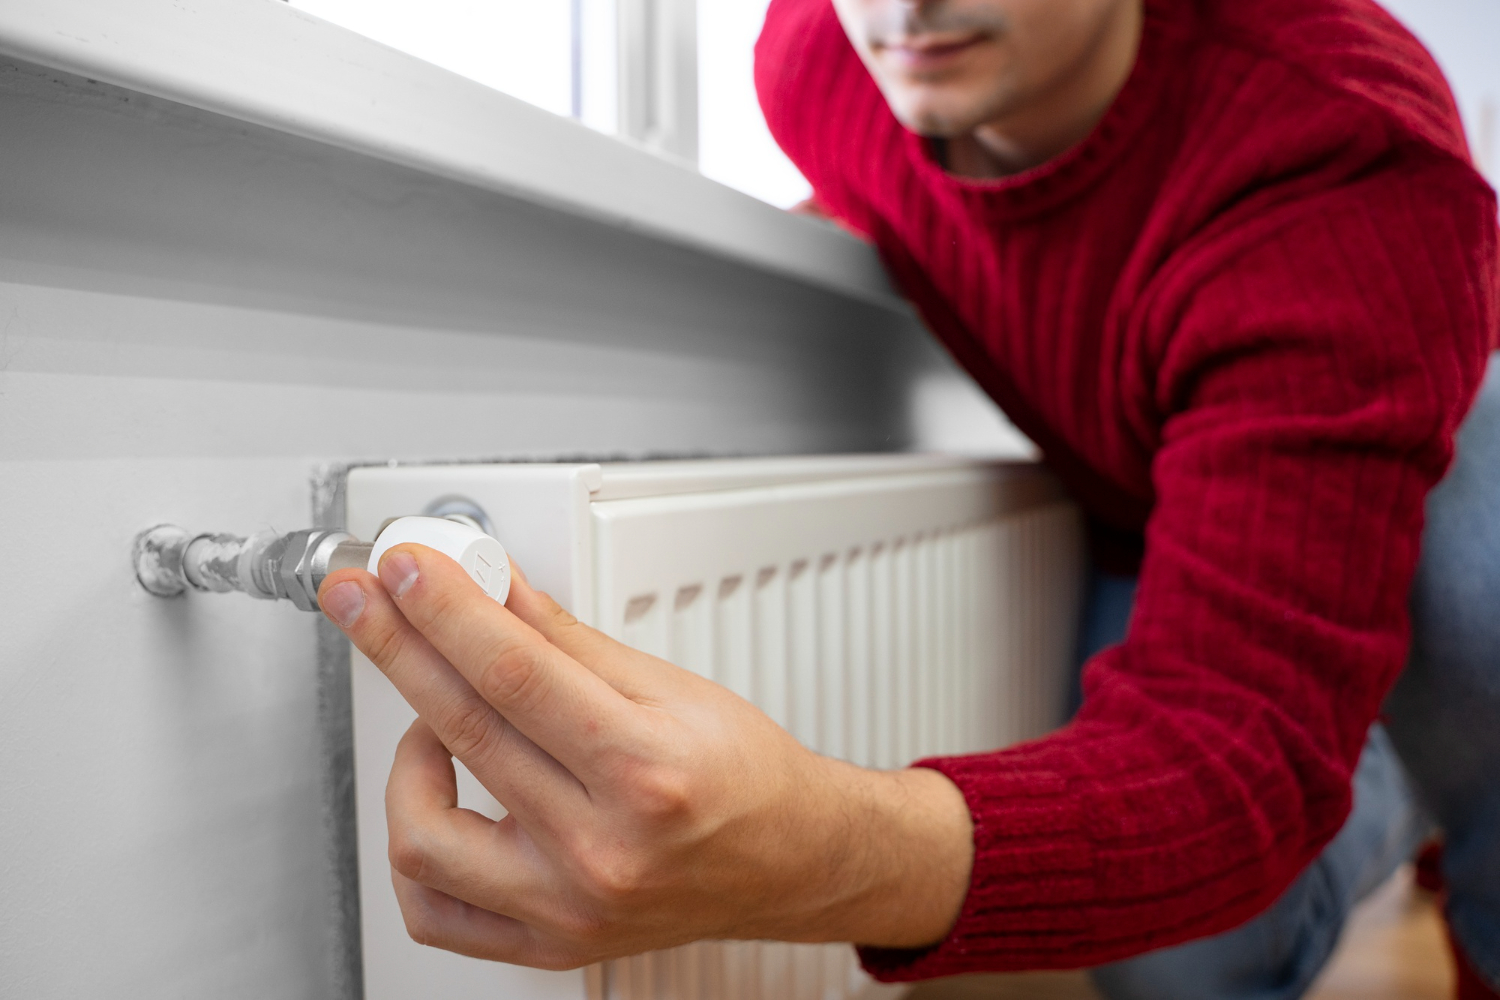 When does my Hydronic Heating System need a service?